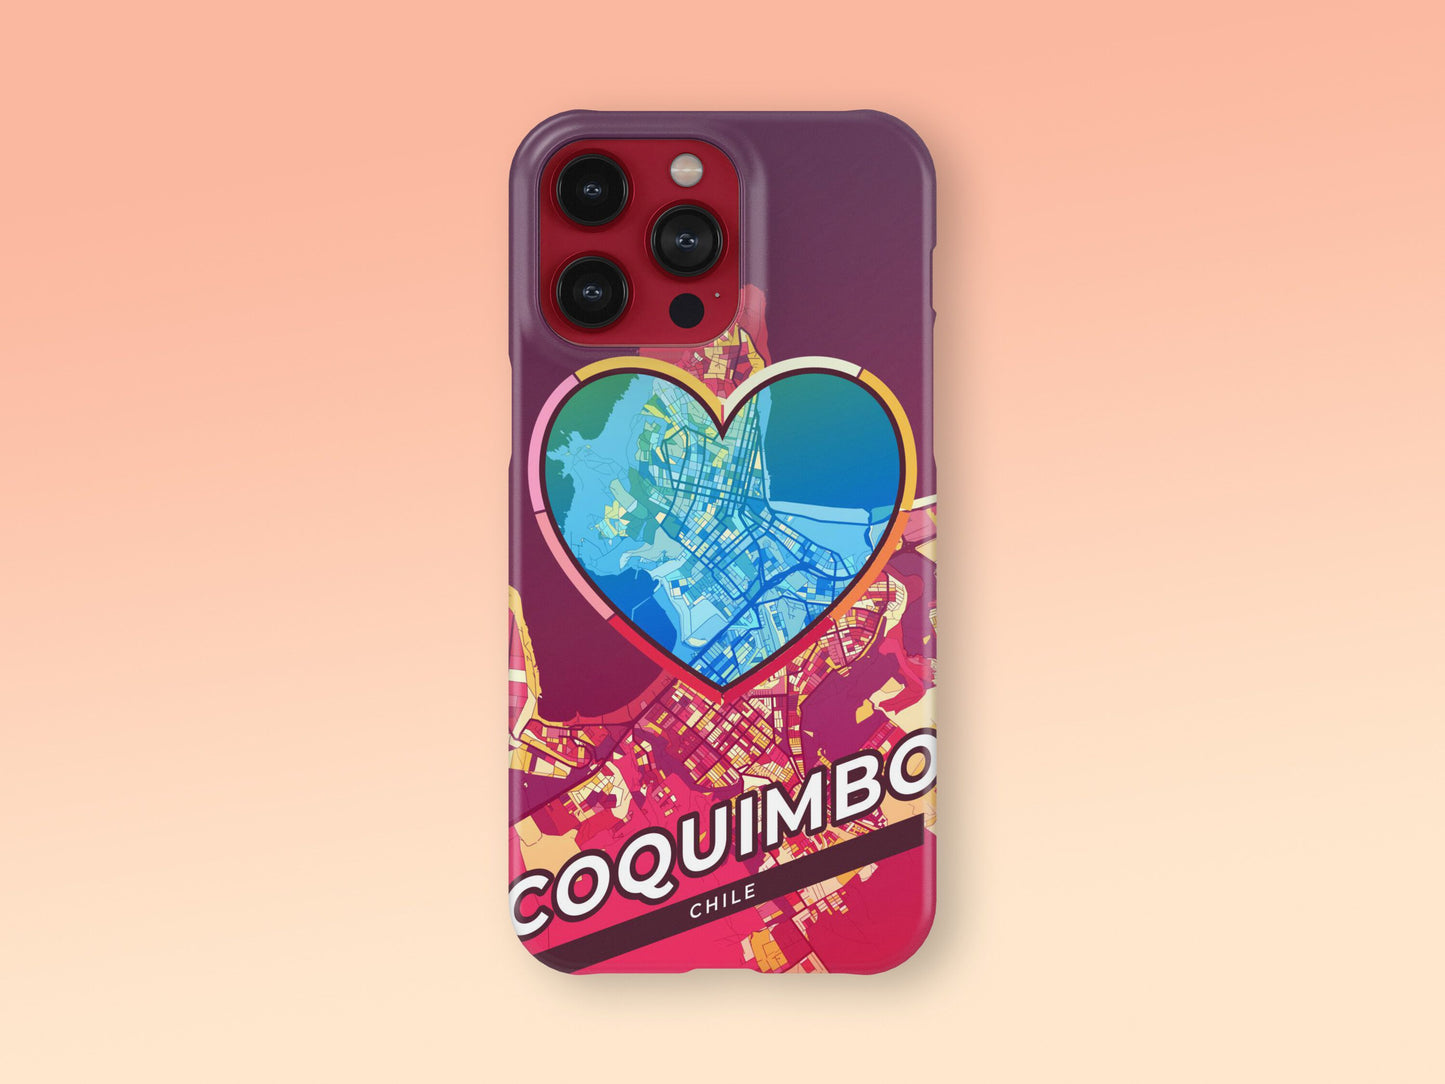 Coquimbo Chile slim phone case with colorful icon. Birthday, wedding or housewarming gift. Couple match cases. 2